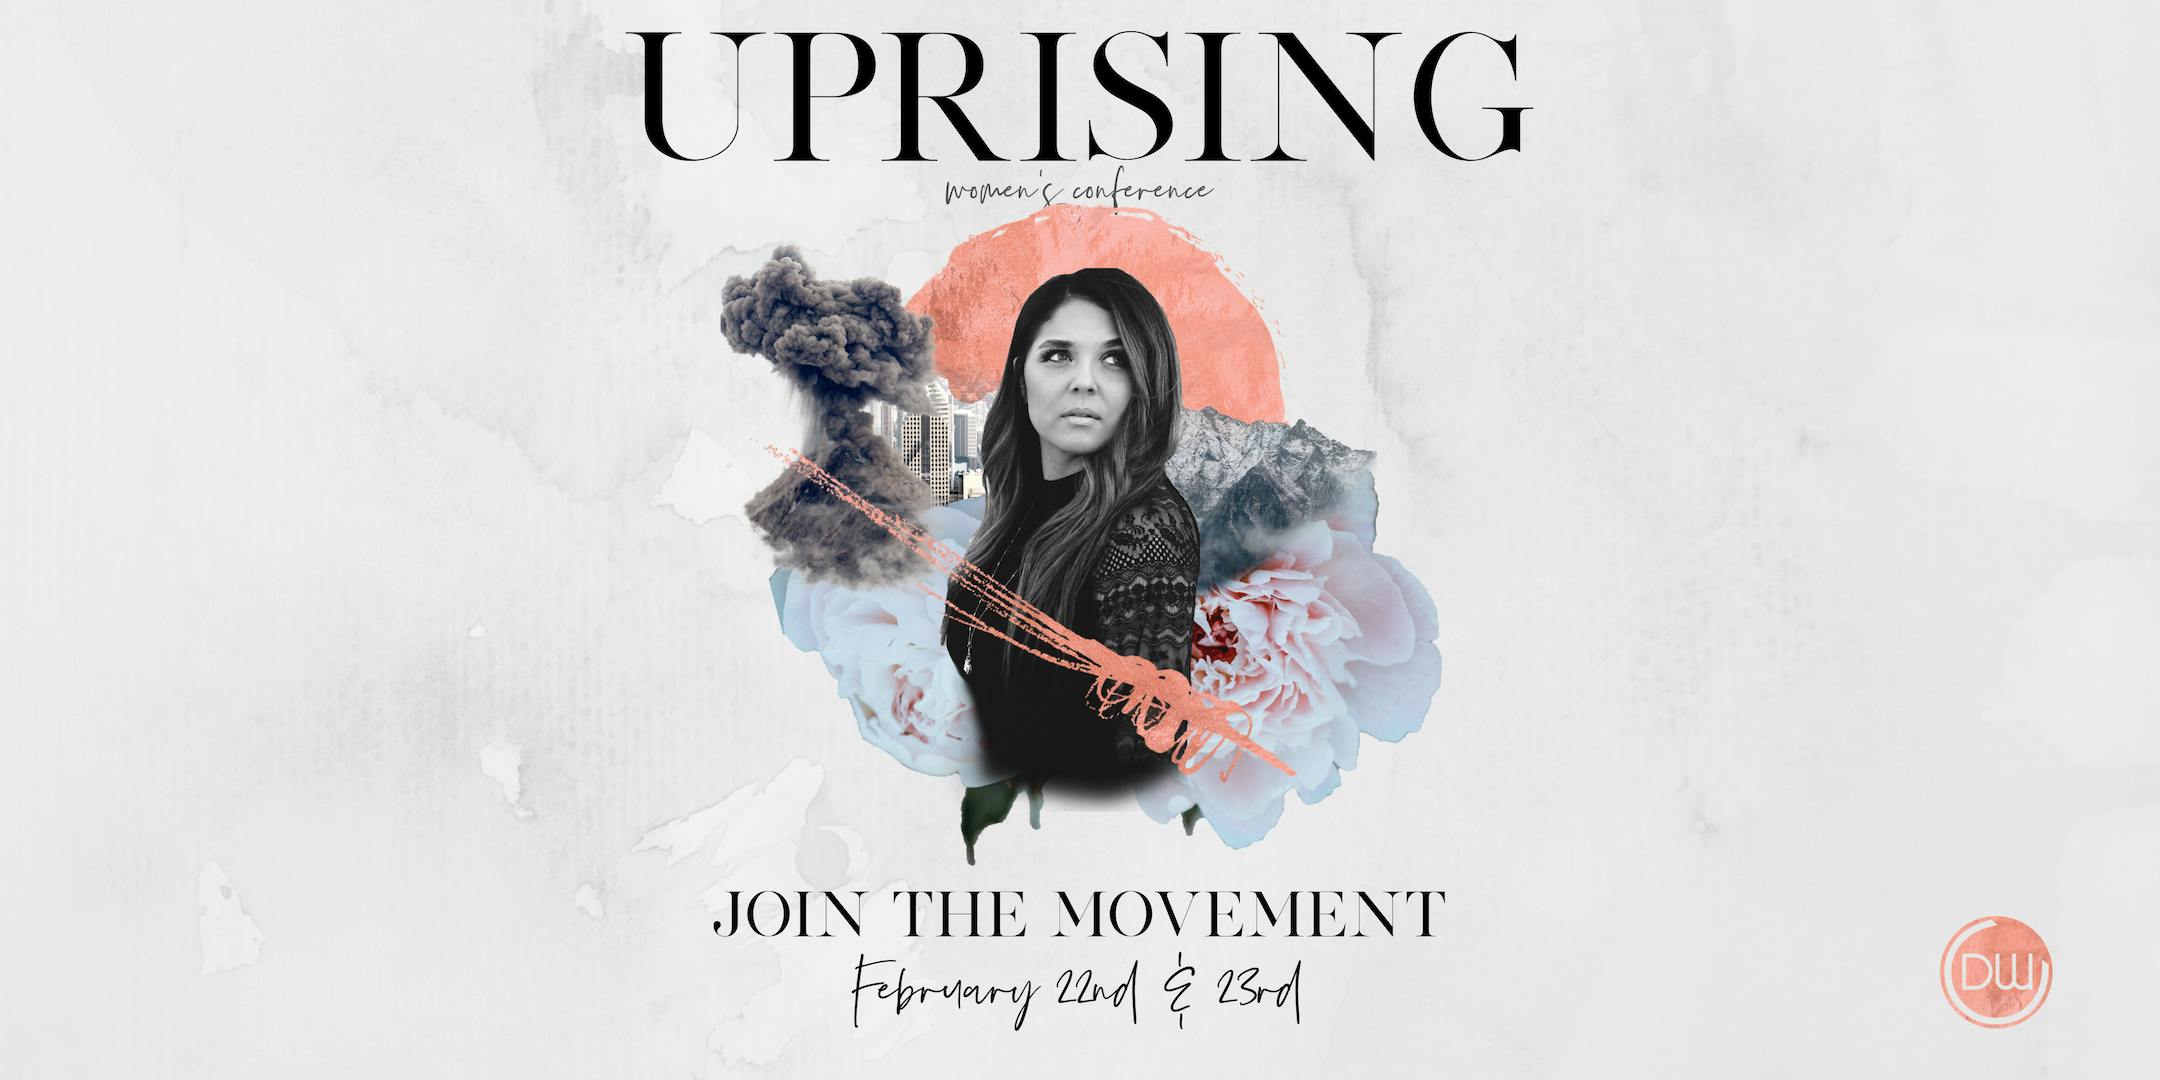 UPRISING: Join the Movement/ Women's Conference